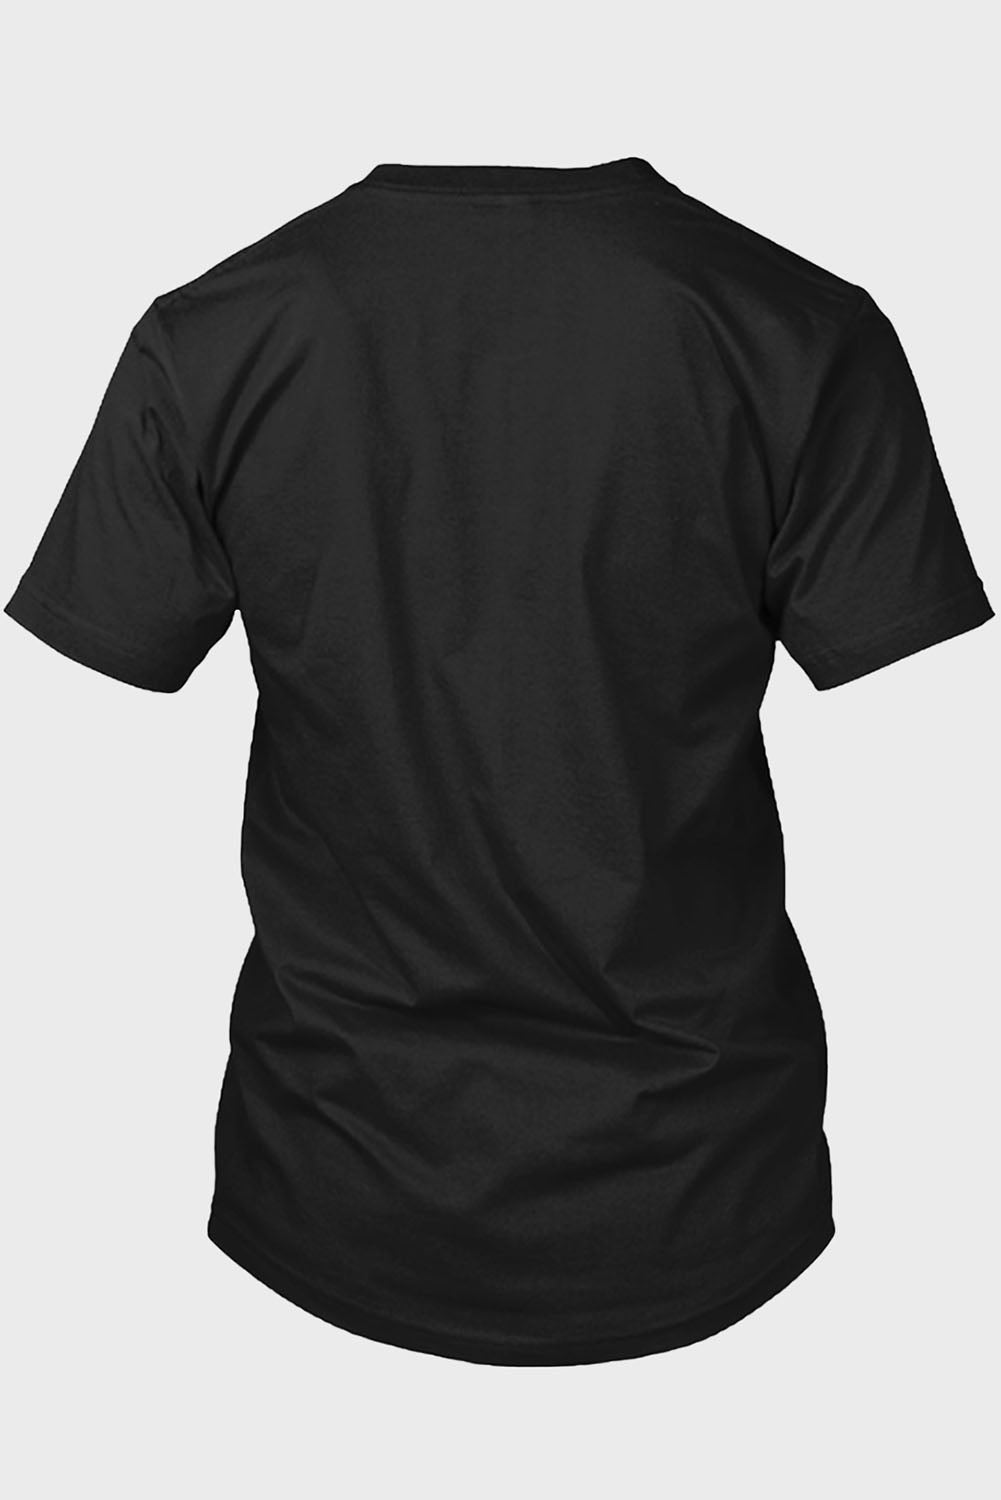 Black That's What I Do I Fix Stuff And I Know Things T Shirt Men's Tops JT's Designer Fashion